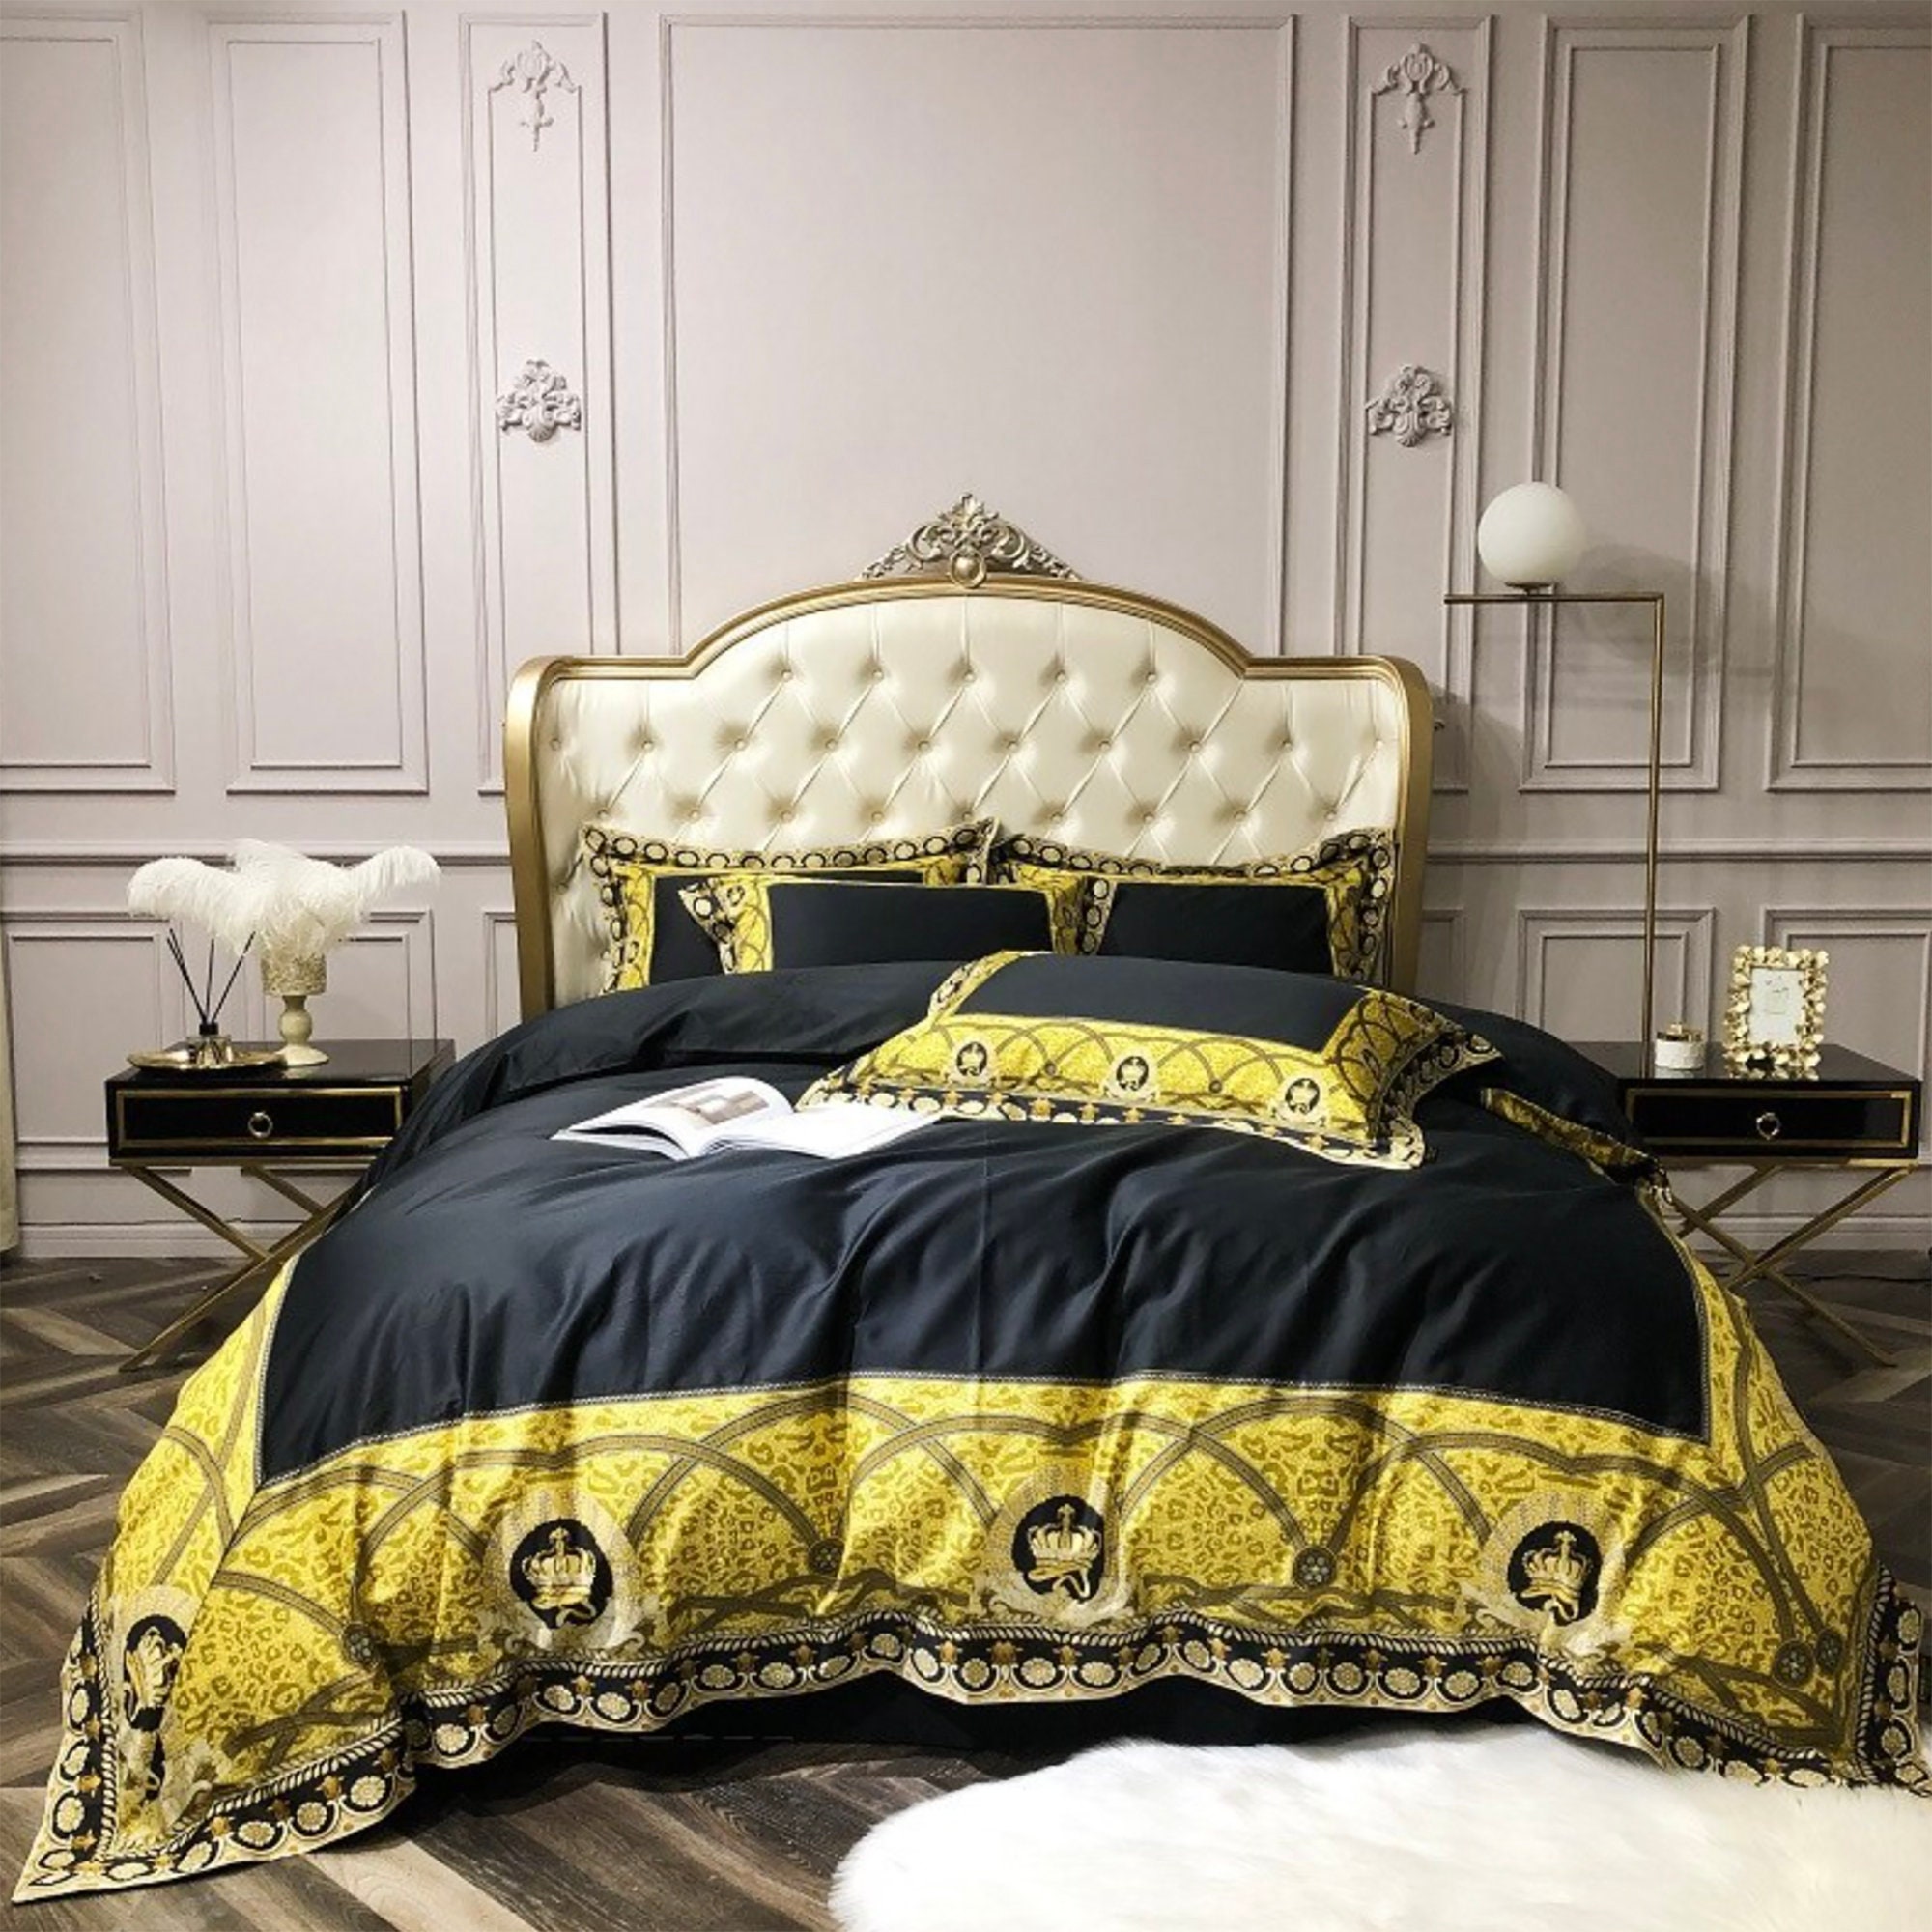 Personalized Luxury Louis Vuitton Bedding Set - Trends Bedding